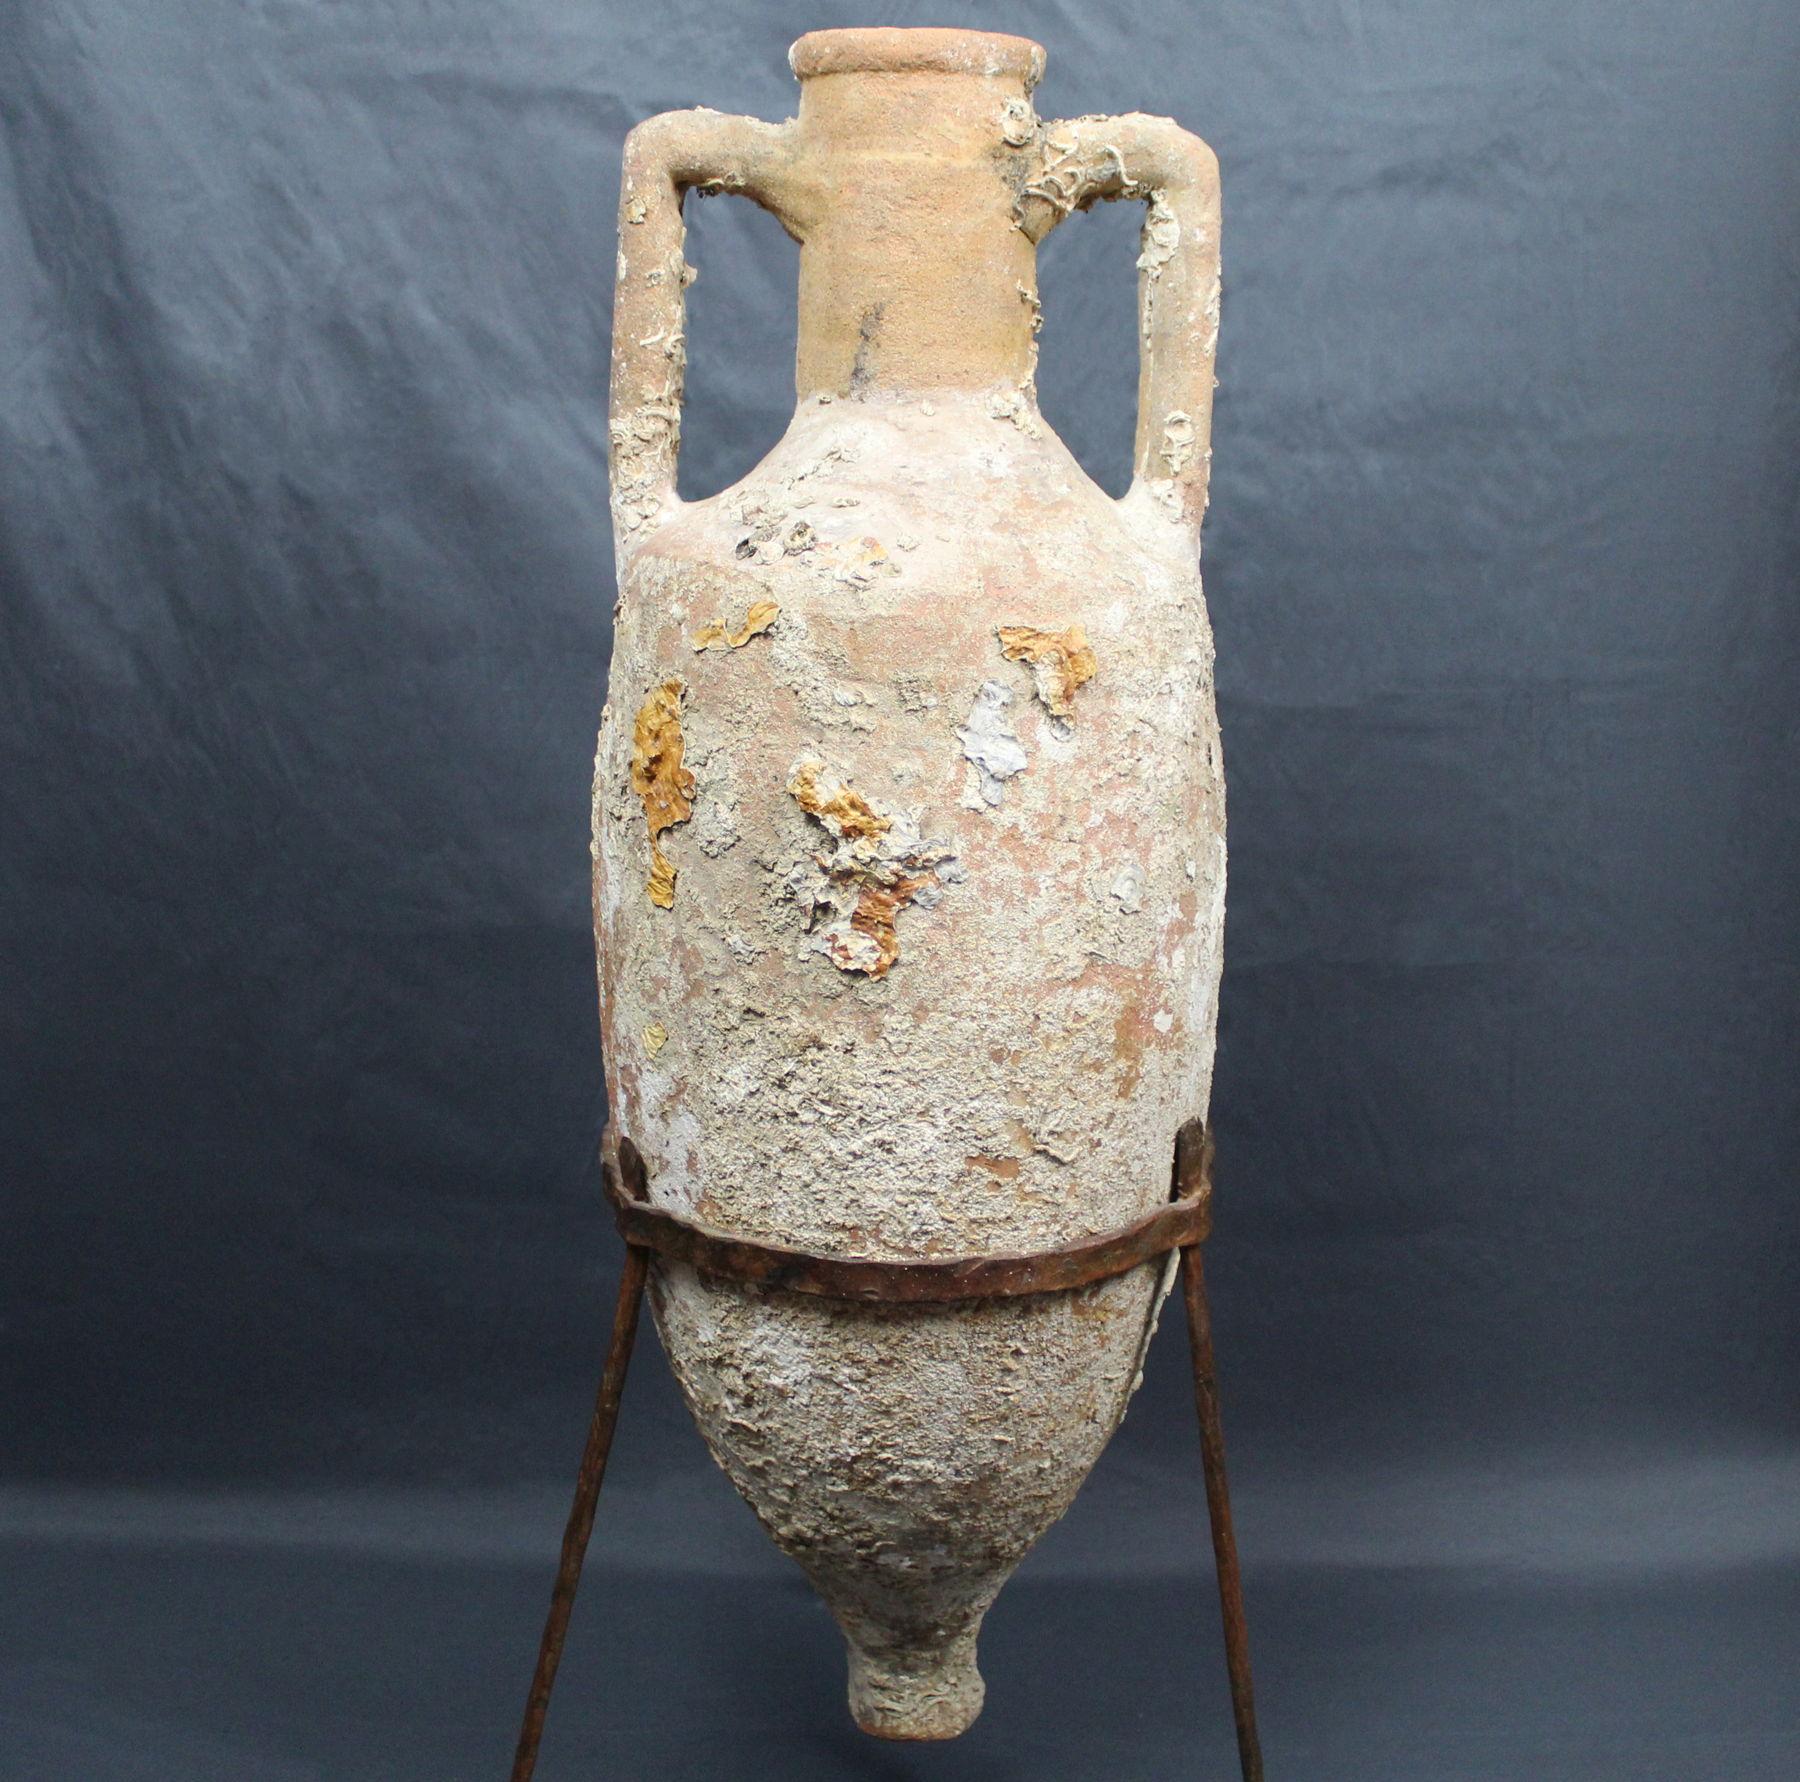 ITEM: Shipwreck amphora, Type Dressel 3
MATERIAL: Pottery
CULTURE: Roman
PERIOD: 1st – 2nd Century A.D
DIMENSIONS: 84 cm x 26 cm diameter (without stand), 90 cm x 26 cm diameter (with stand)
CONDITION: Good condition. Small missing part in the